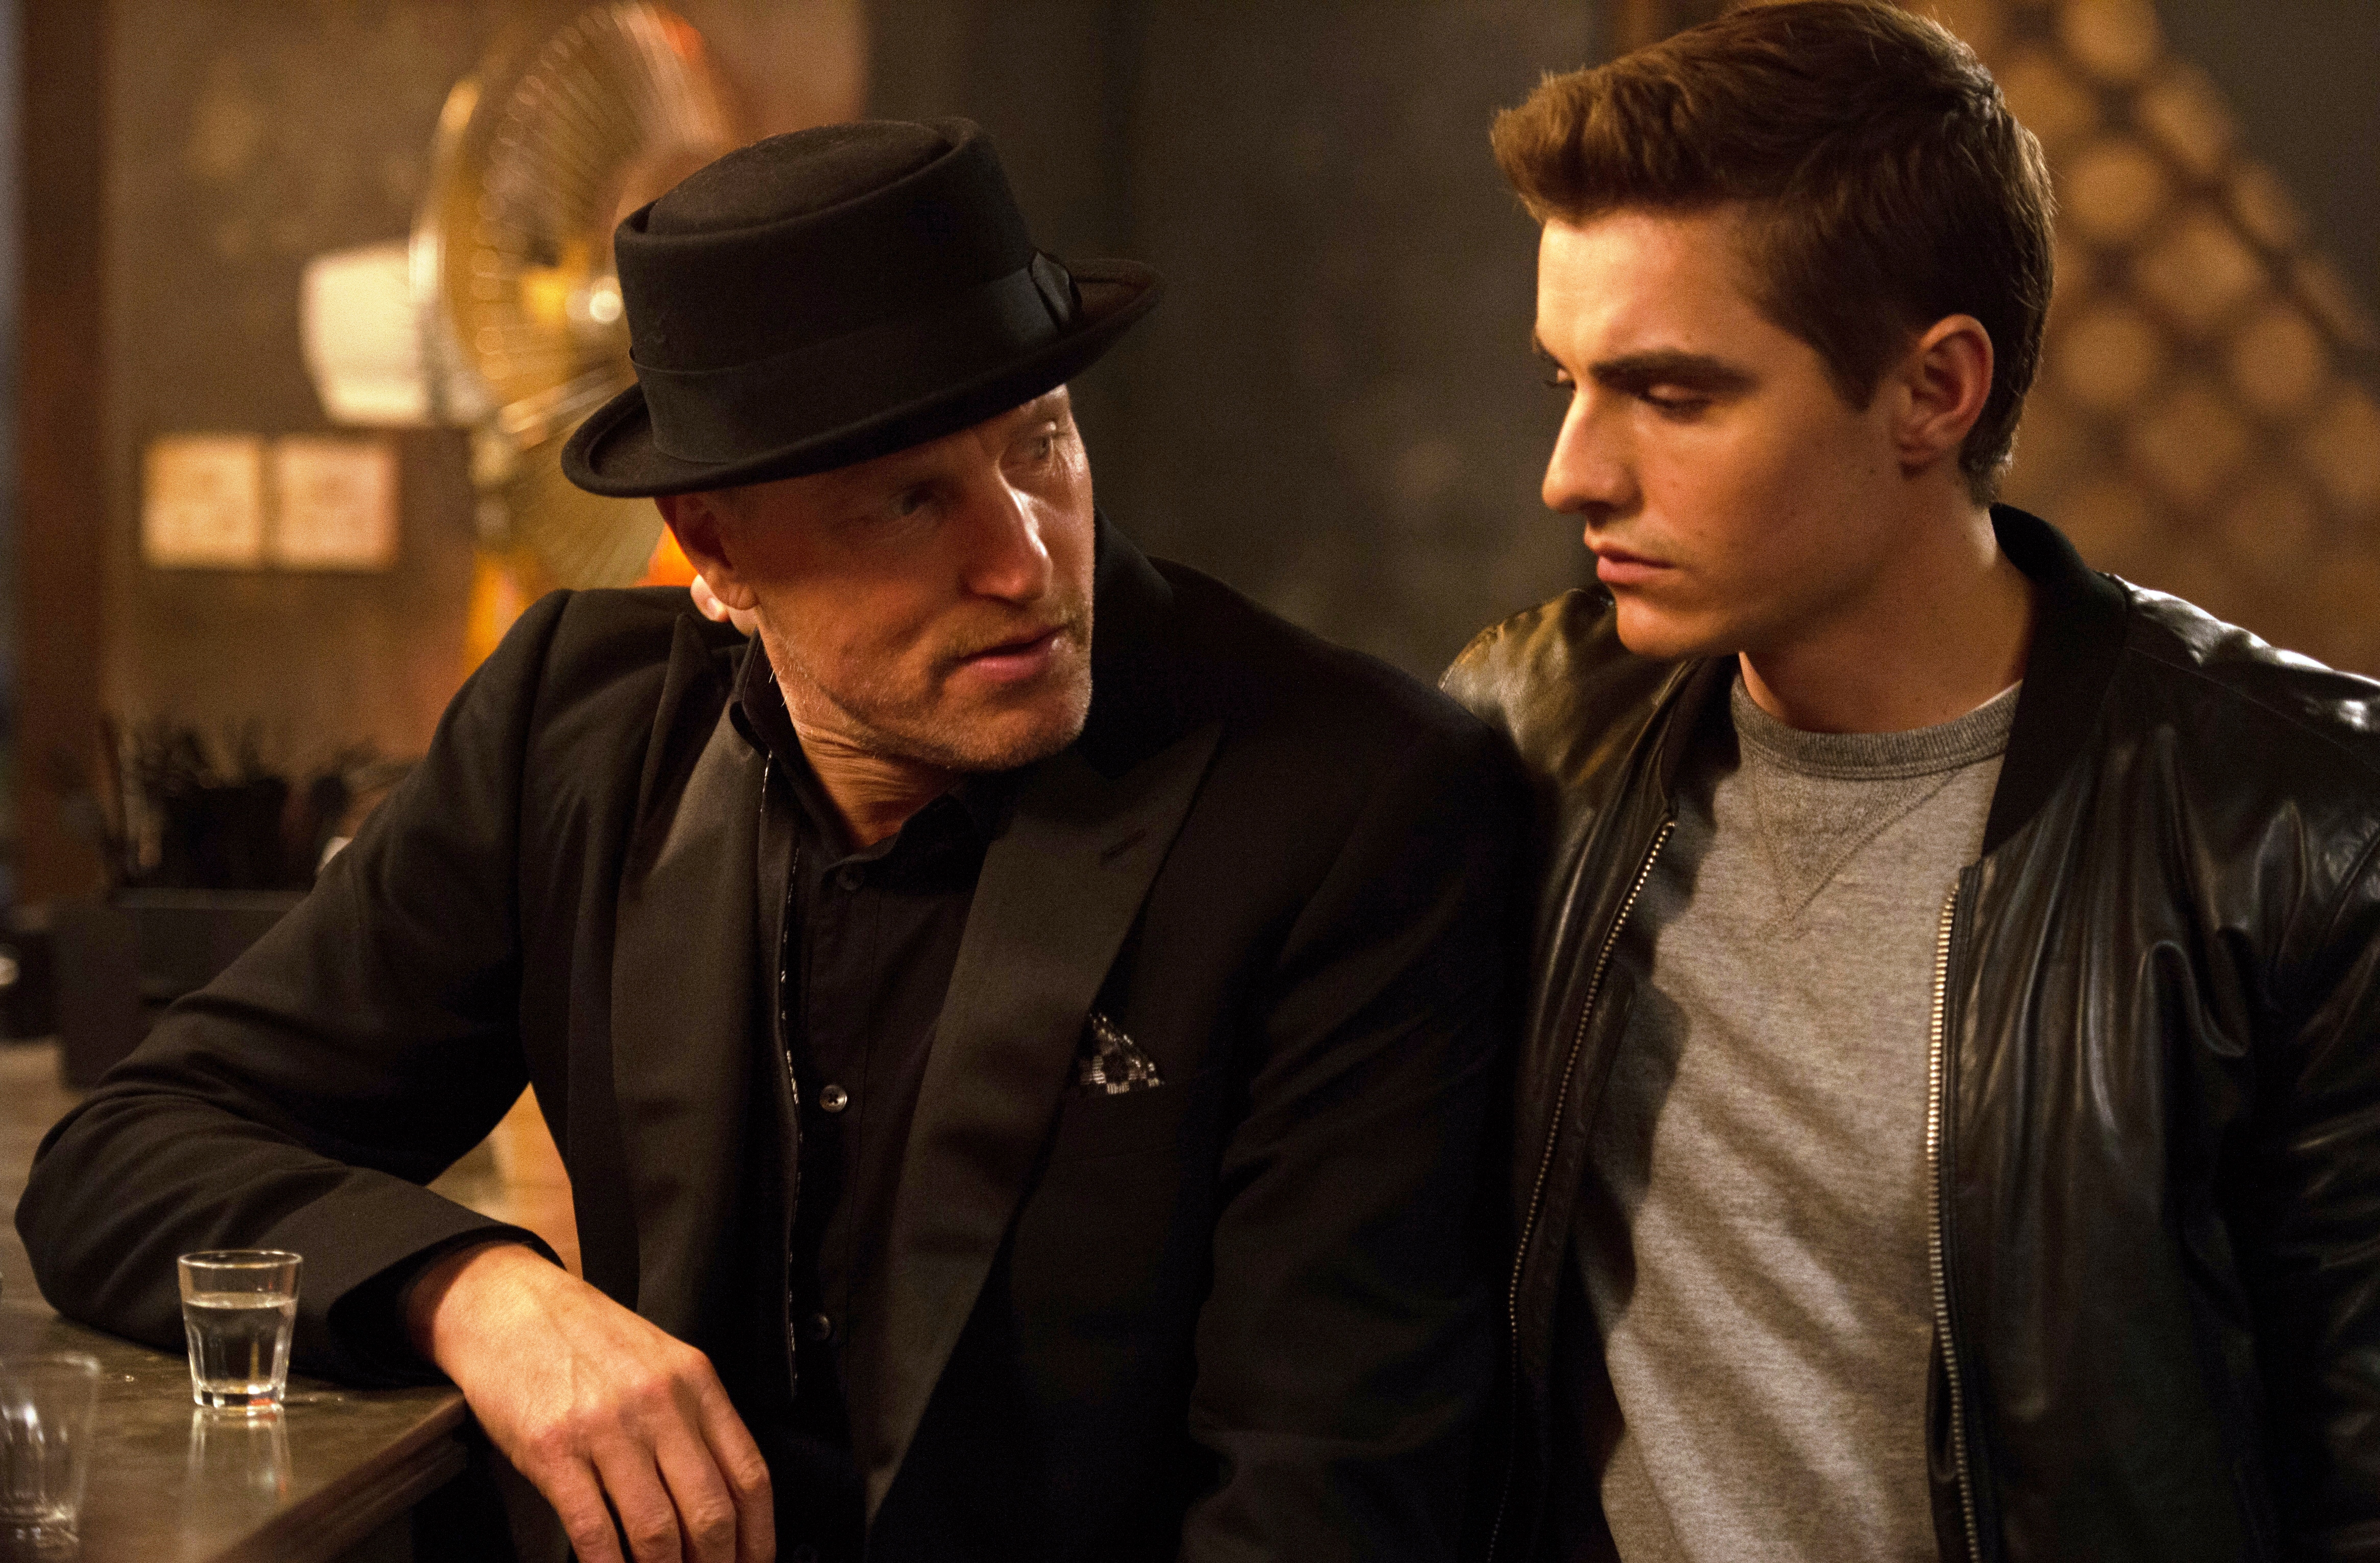 Movie Now You See Me 2 4k Ultra HD Wallpaper